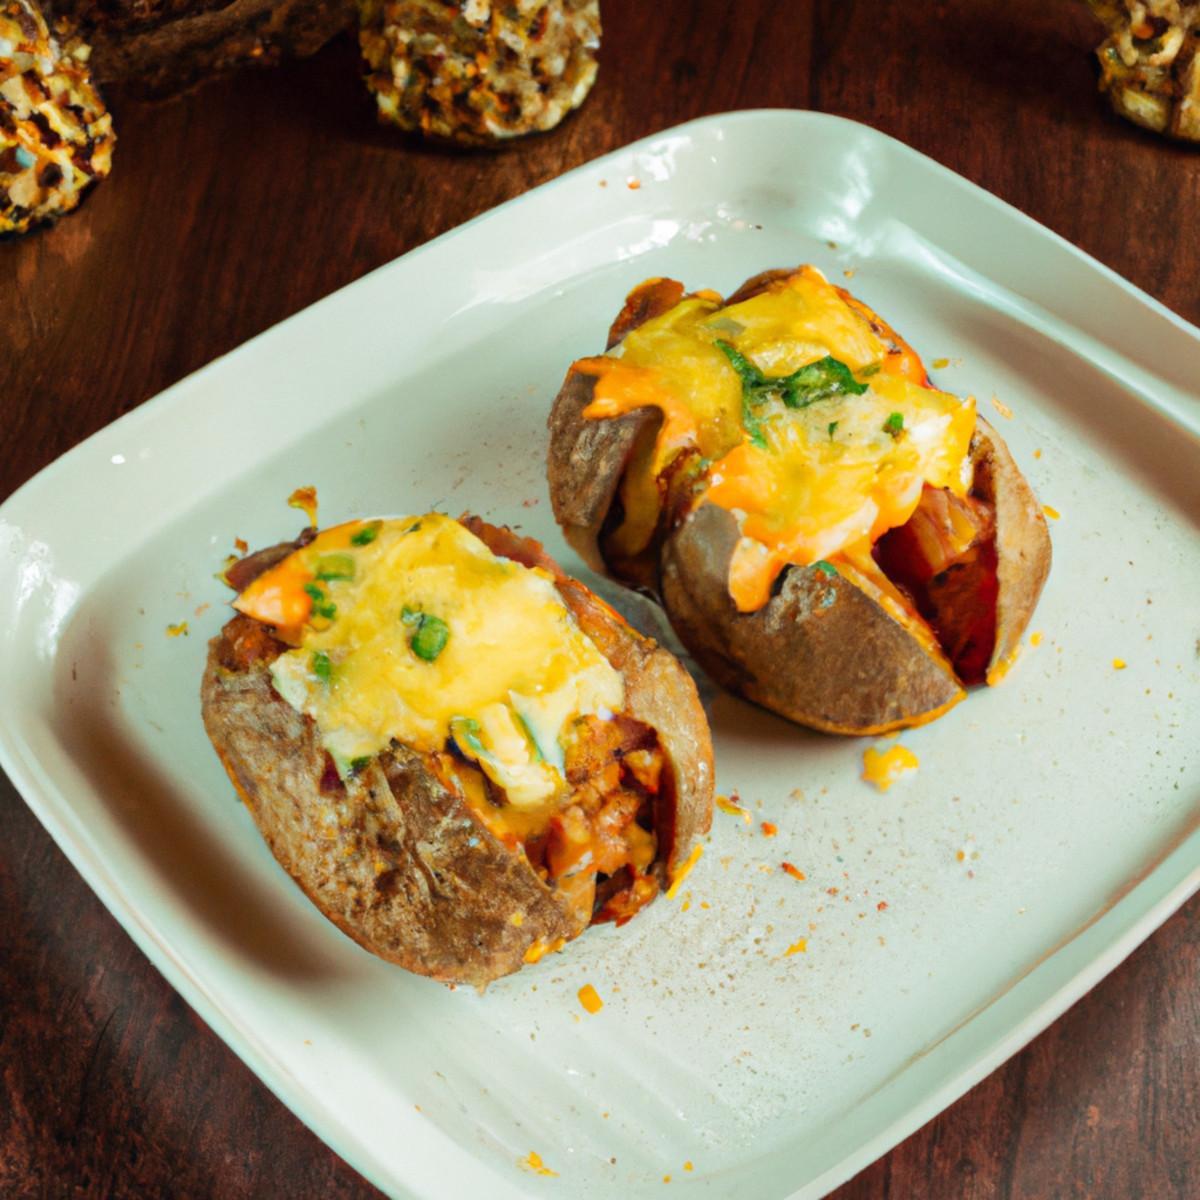 beyond meatloaf stuffed and baked potatoes